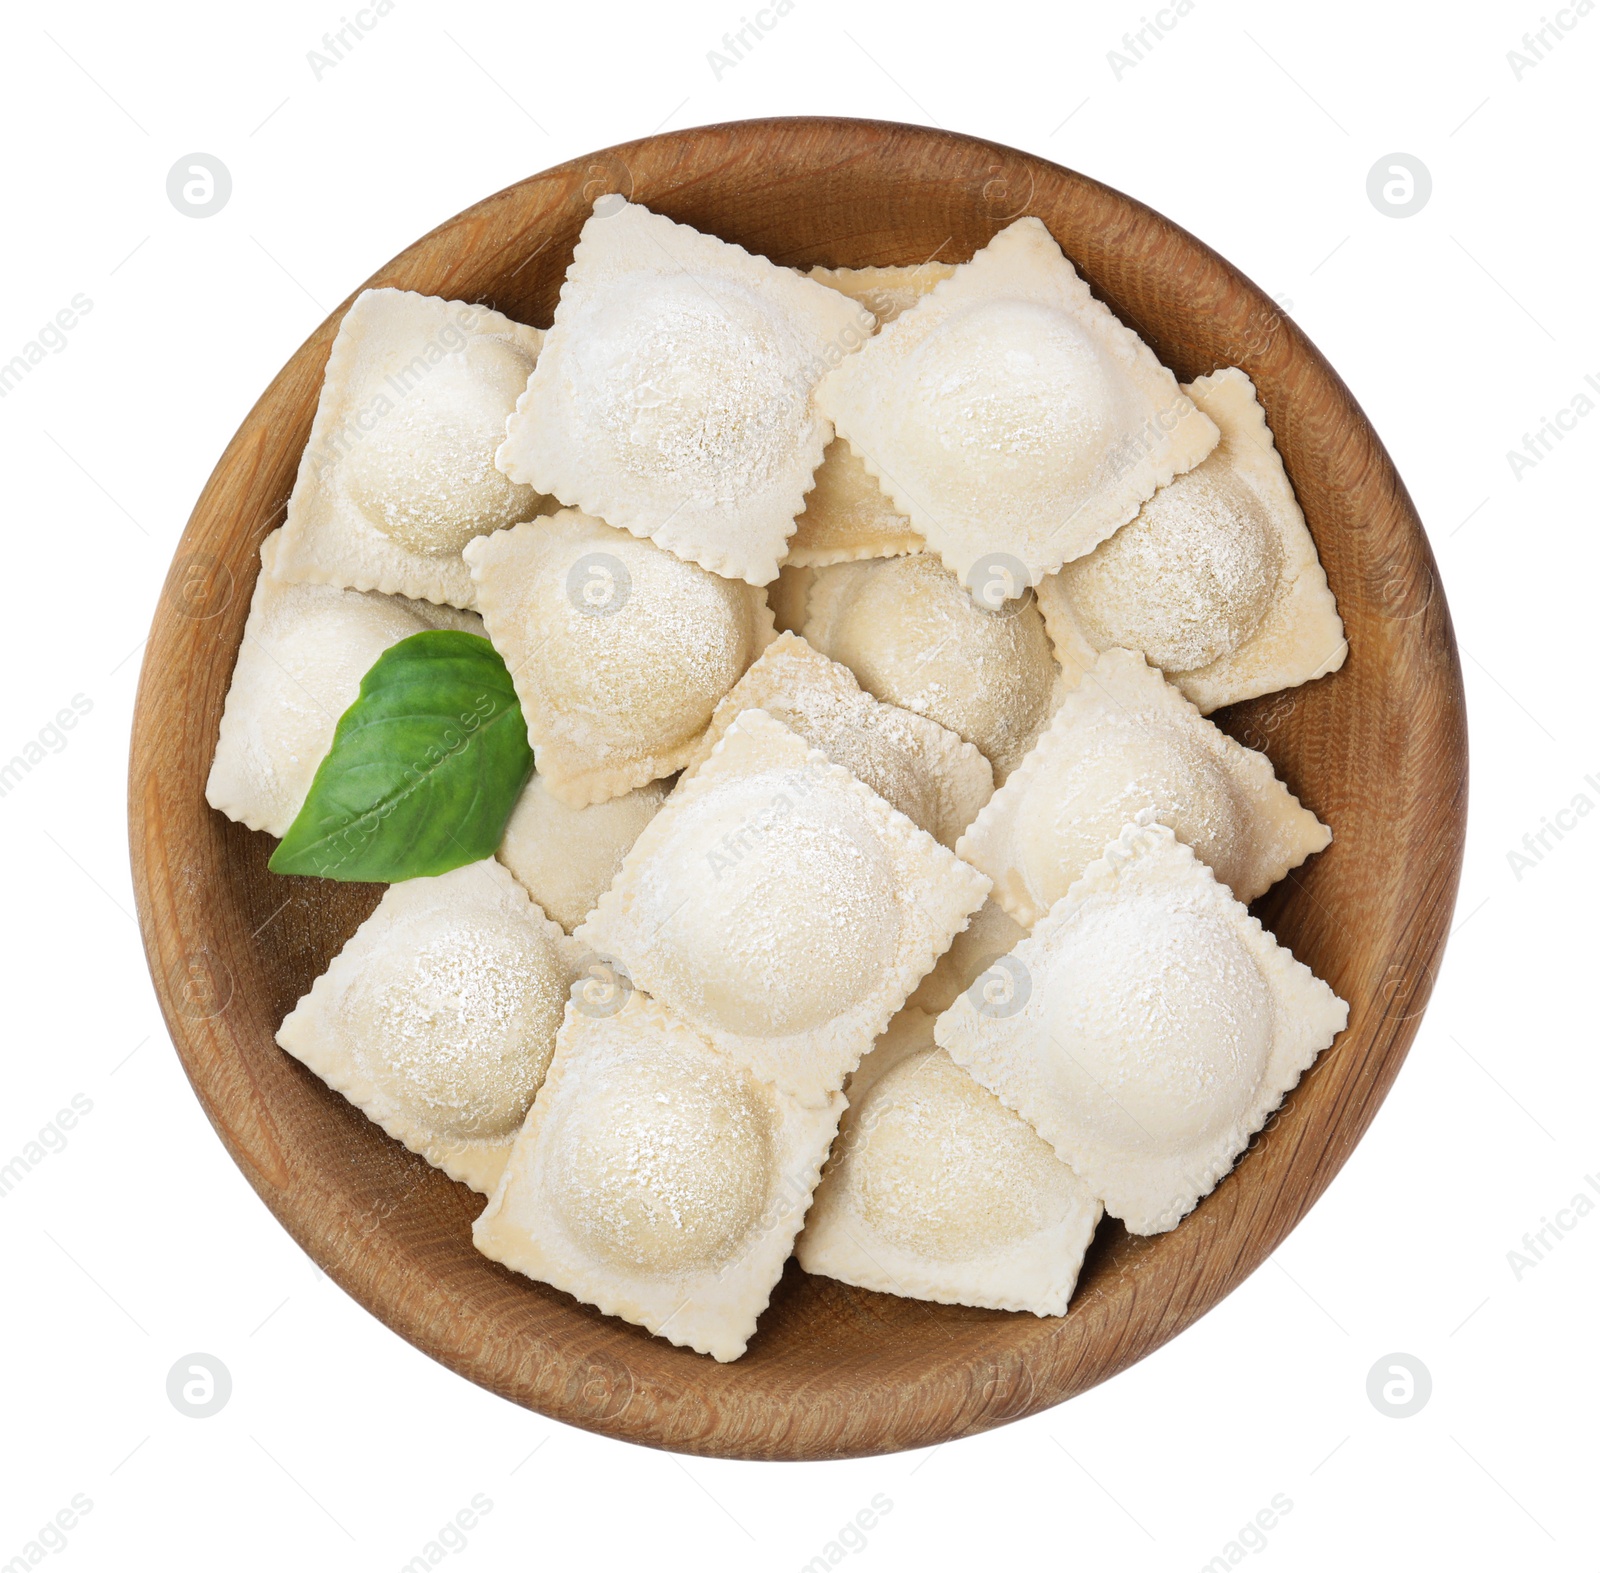 Photo of Uncooked ravioli and basil in wooden bowl on white background, top view